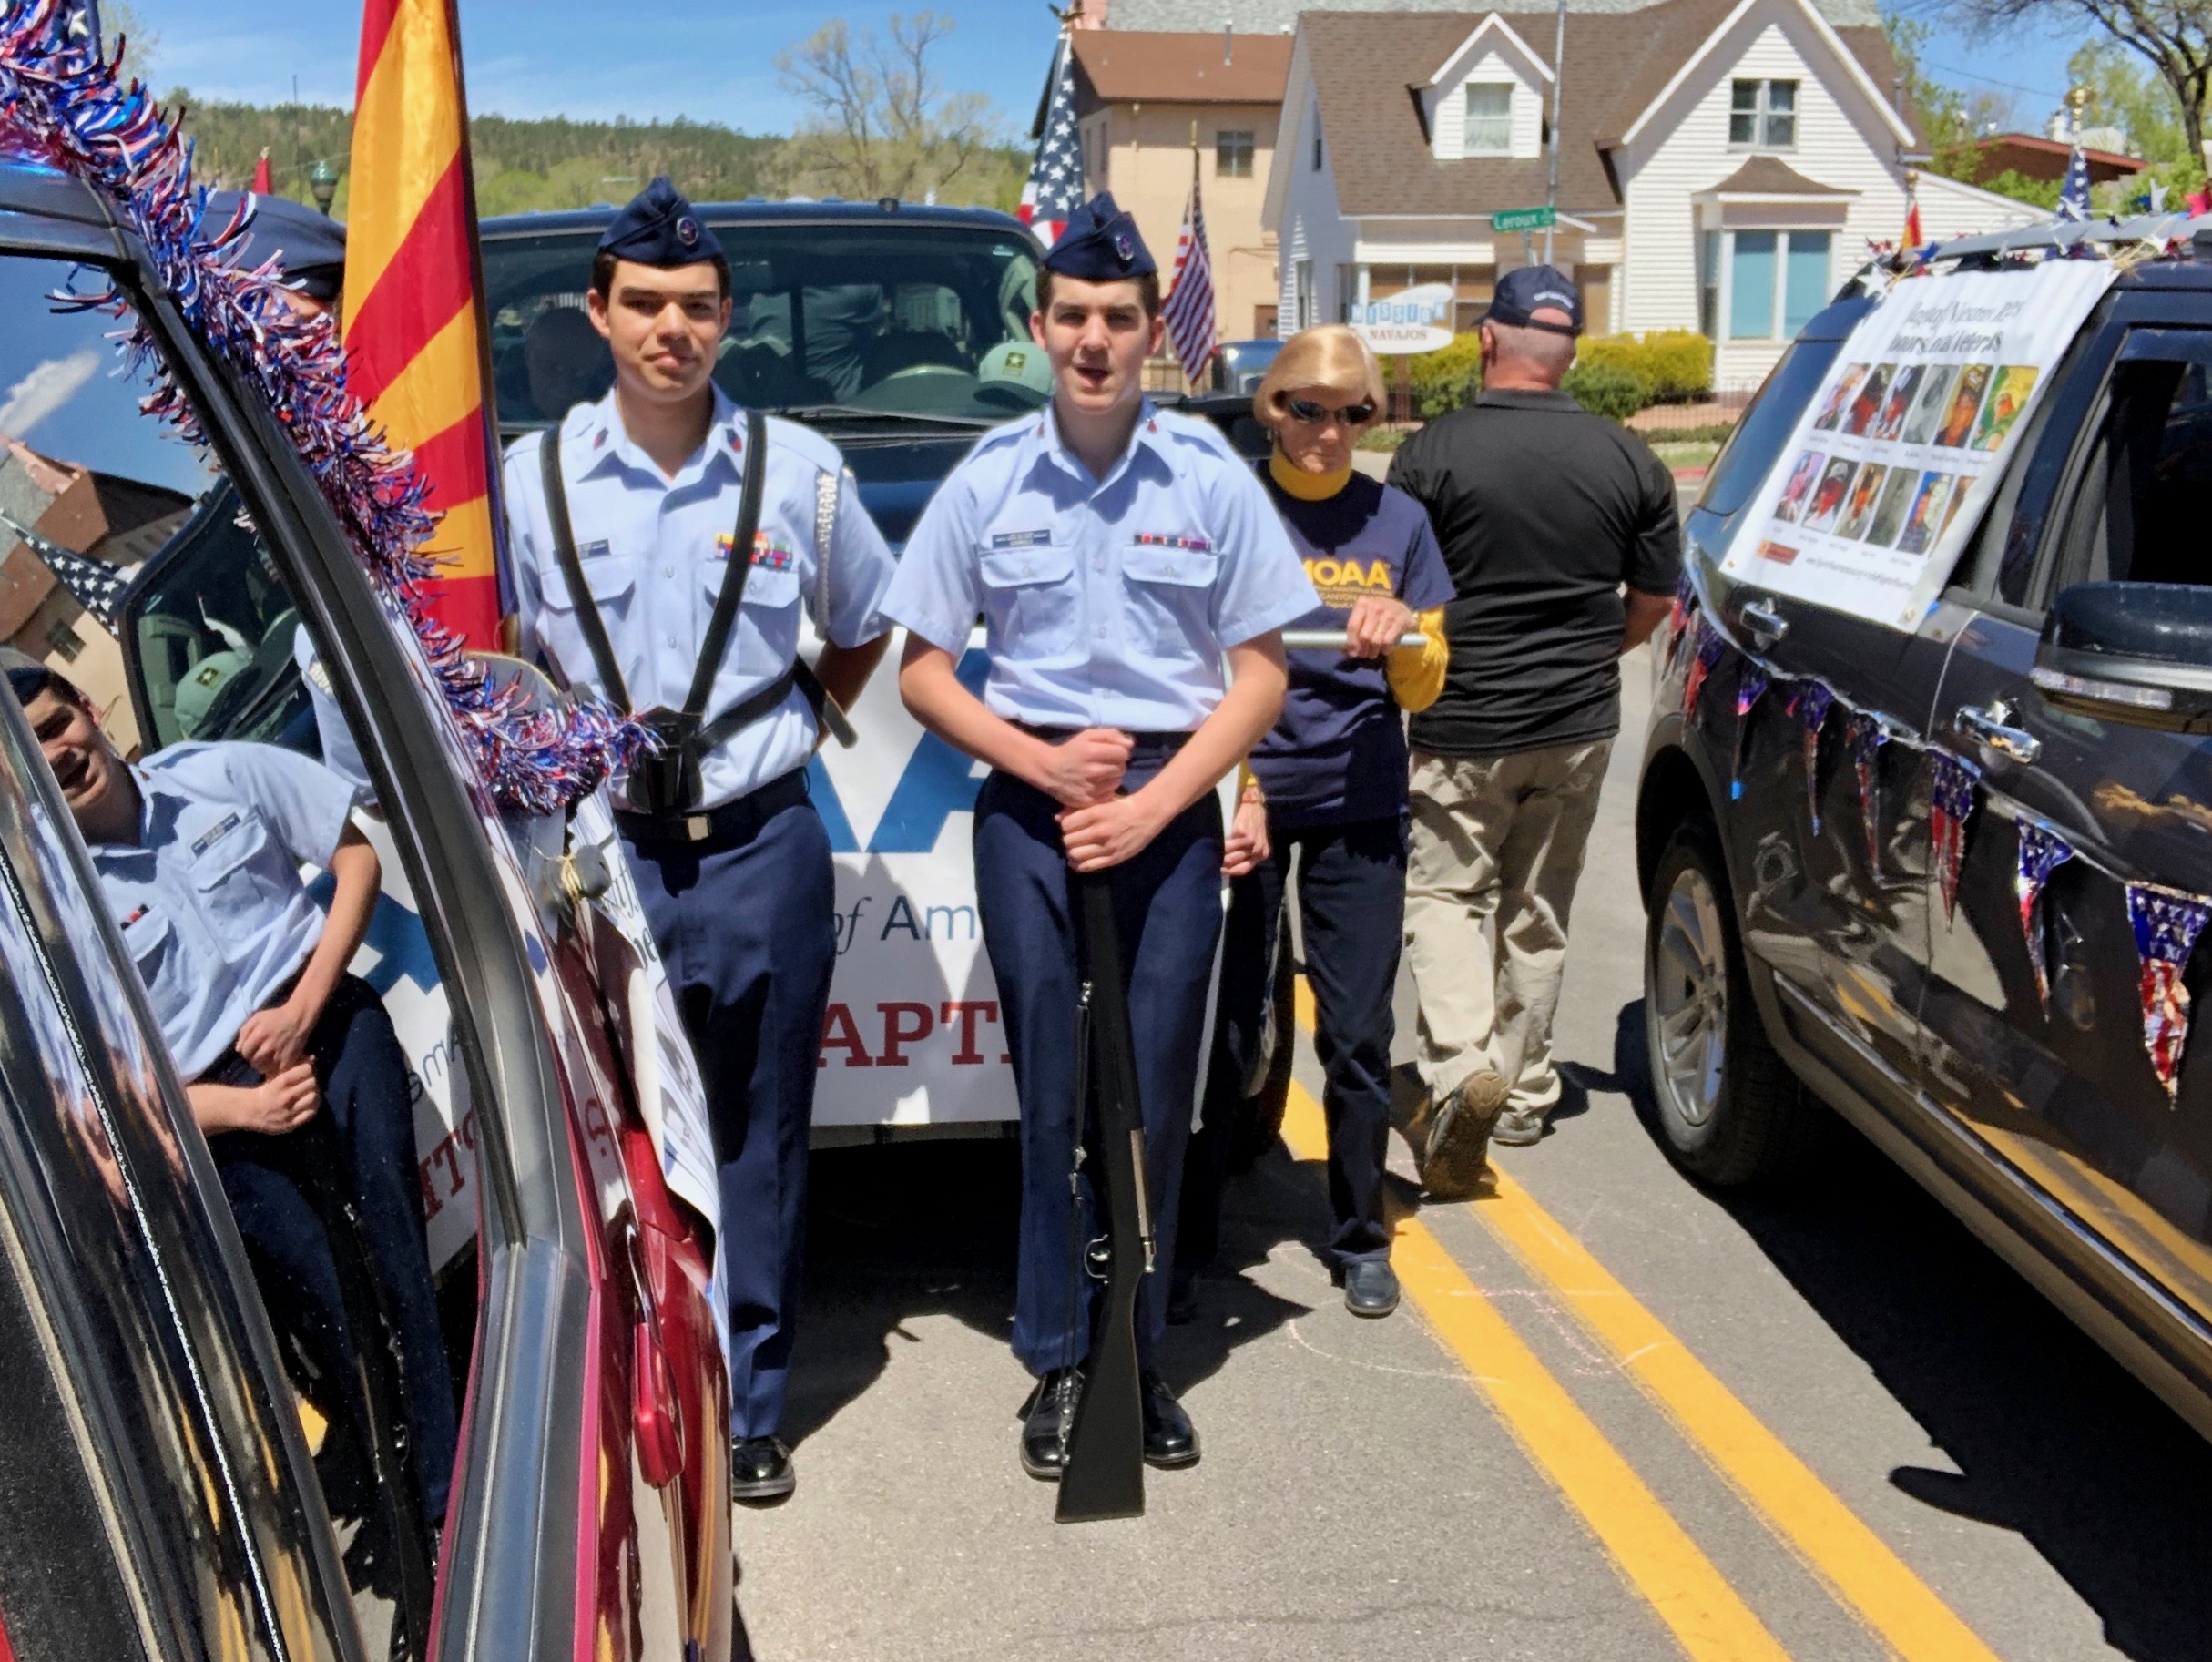 05-18-19 Armed Forces Parade-040